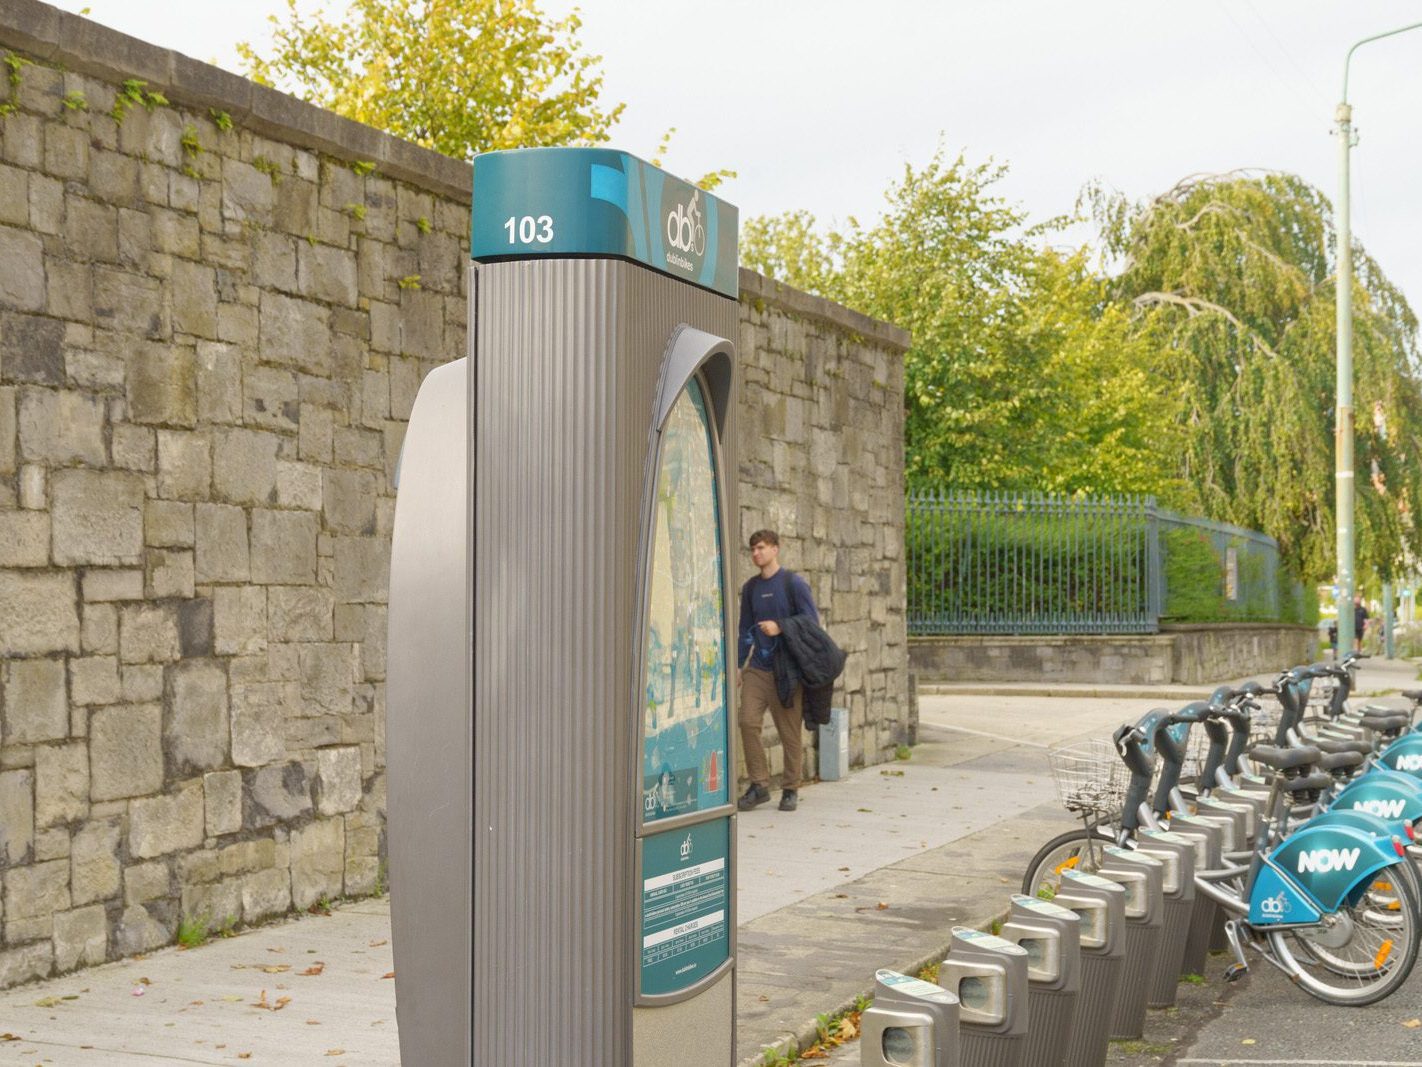 DUBLINBIKES DOCKING STATIONS AT GRANGEGORMAN [THERE ARE IN FACT THREE 103 104 AND 105] 007